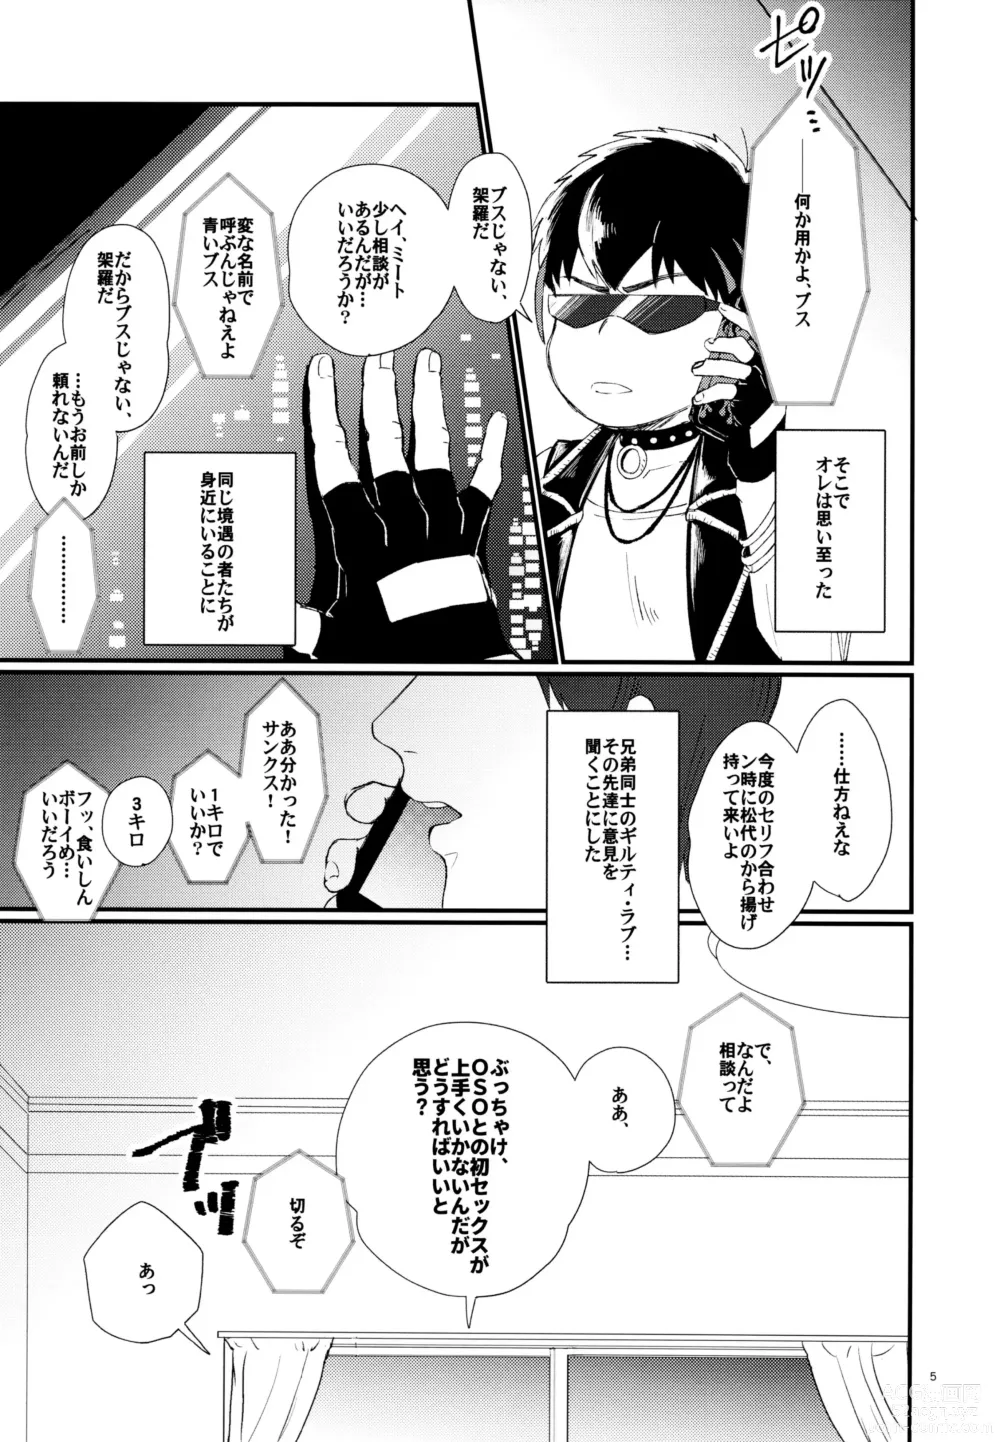 Page 5 of doujinshi A book where OSO seals away the pain of Kara and graduates from virginity.